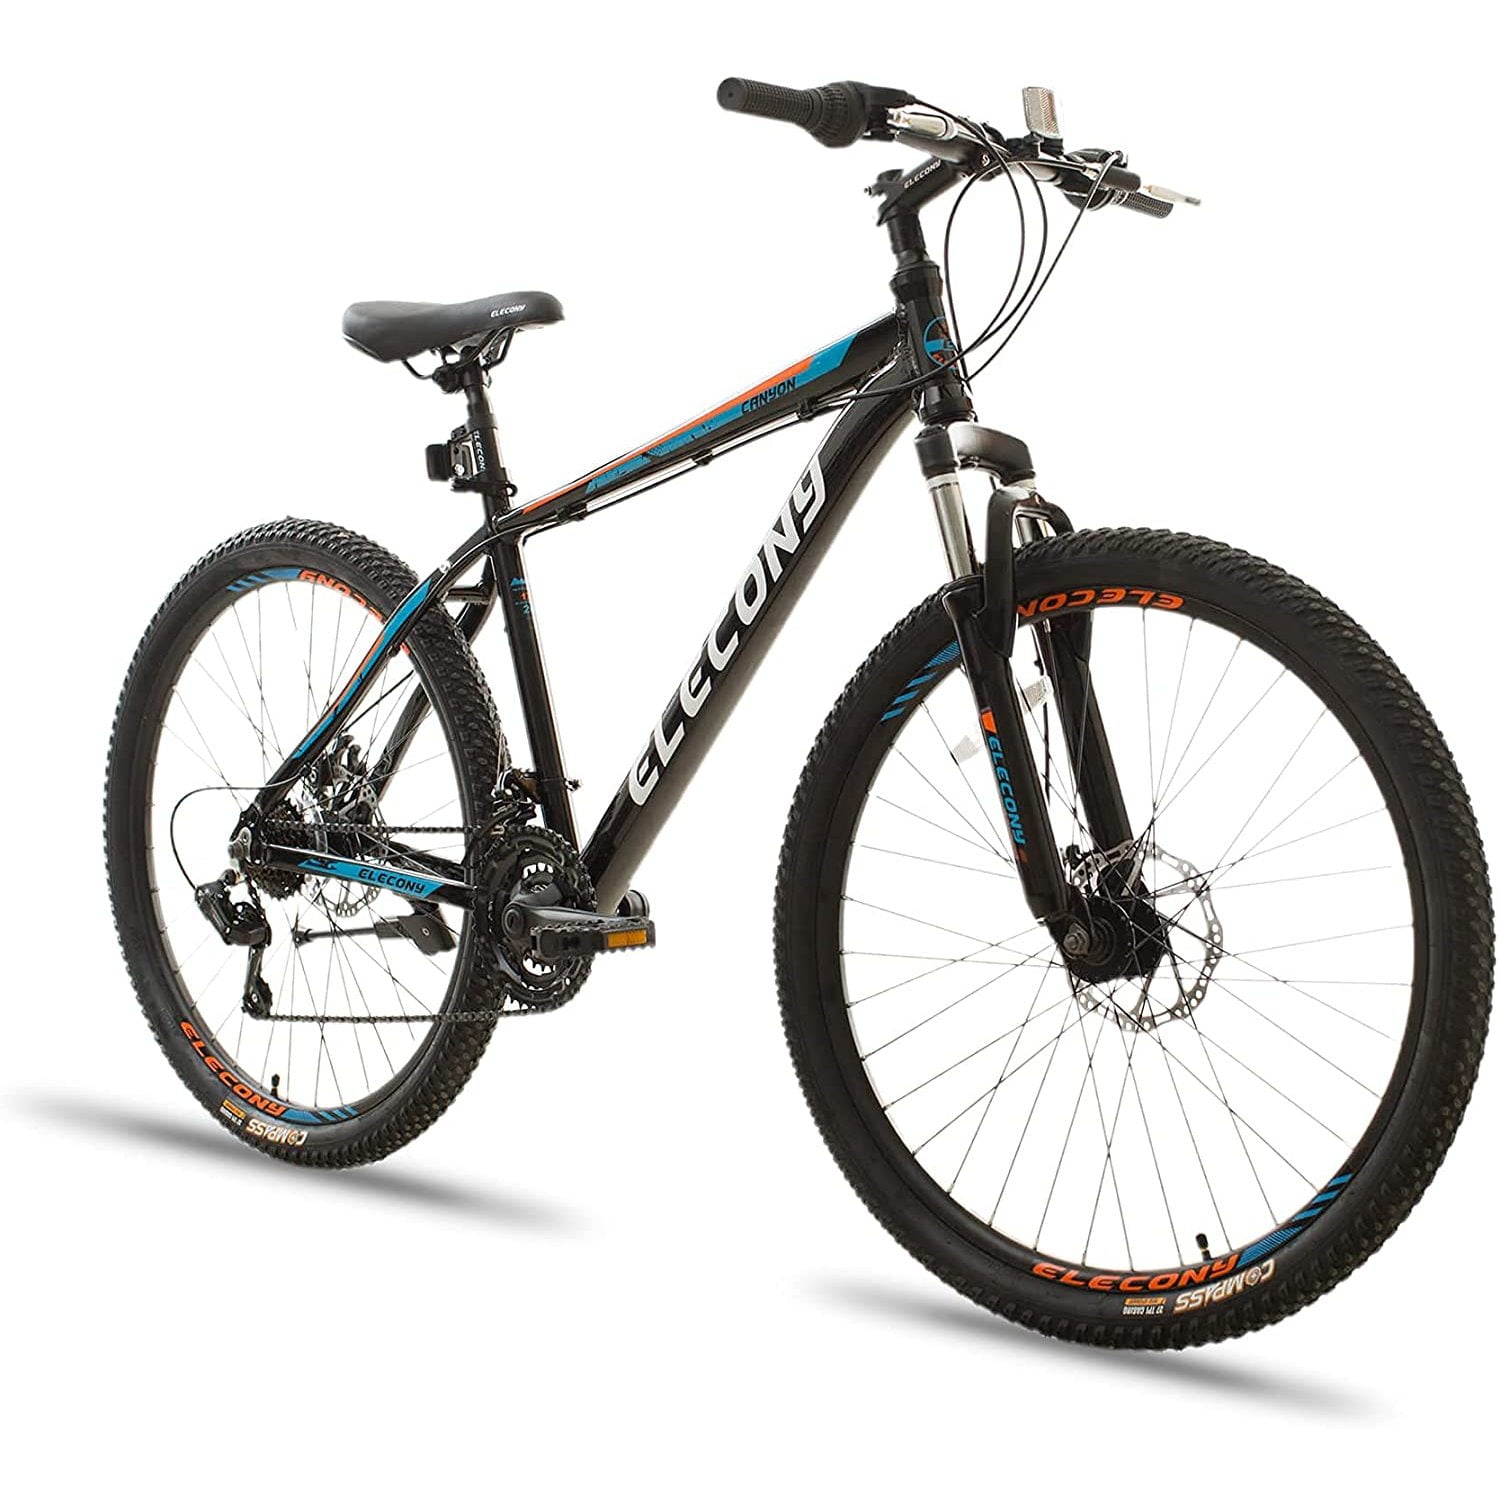 Mountain Trail Bike Elecony 26/20 Inch Fat Tire Bike Adult/Younth Full Shimano 21/7 Speed Mountain Bike High-Carbon Steel Frame Dual Disc Brake Urban Commuter City Bicycle Front Suspension 